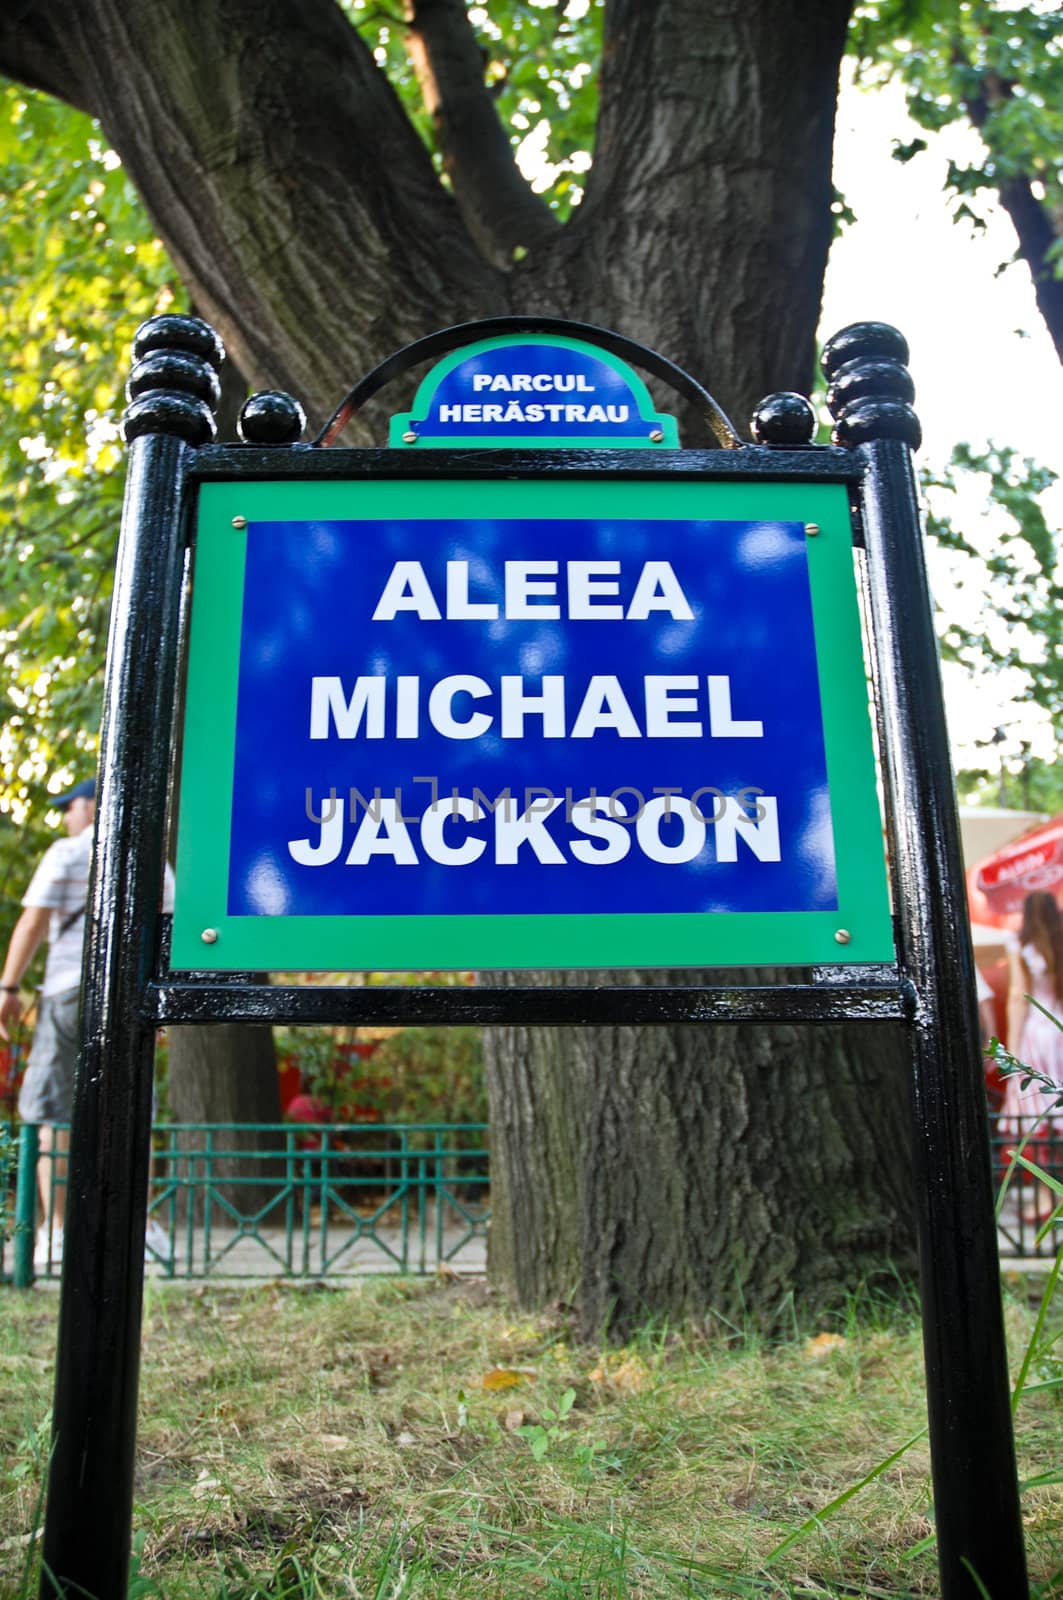 Michael Jackson Alley Inauguration and 51st Birthday Celebration at Michael Jackson Alley on August 29, 2009 in Bucharest, Romania.